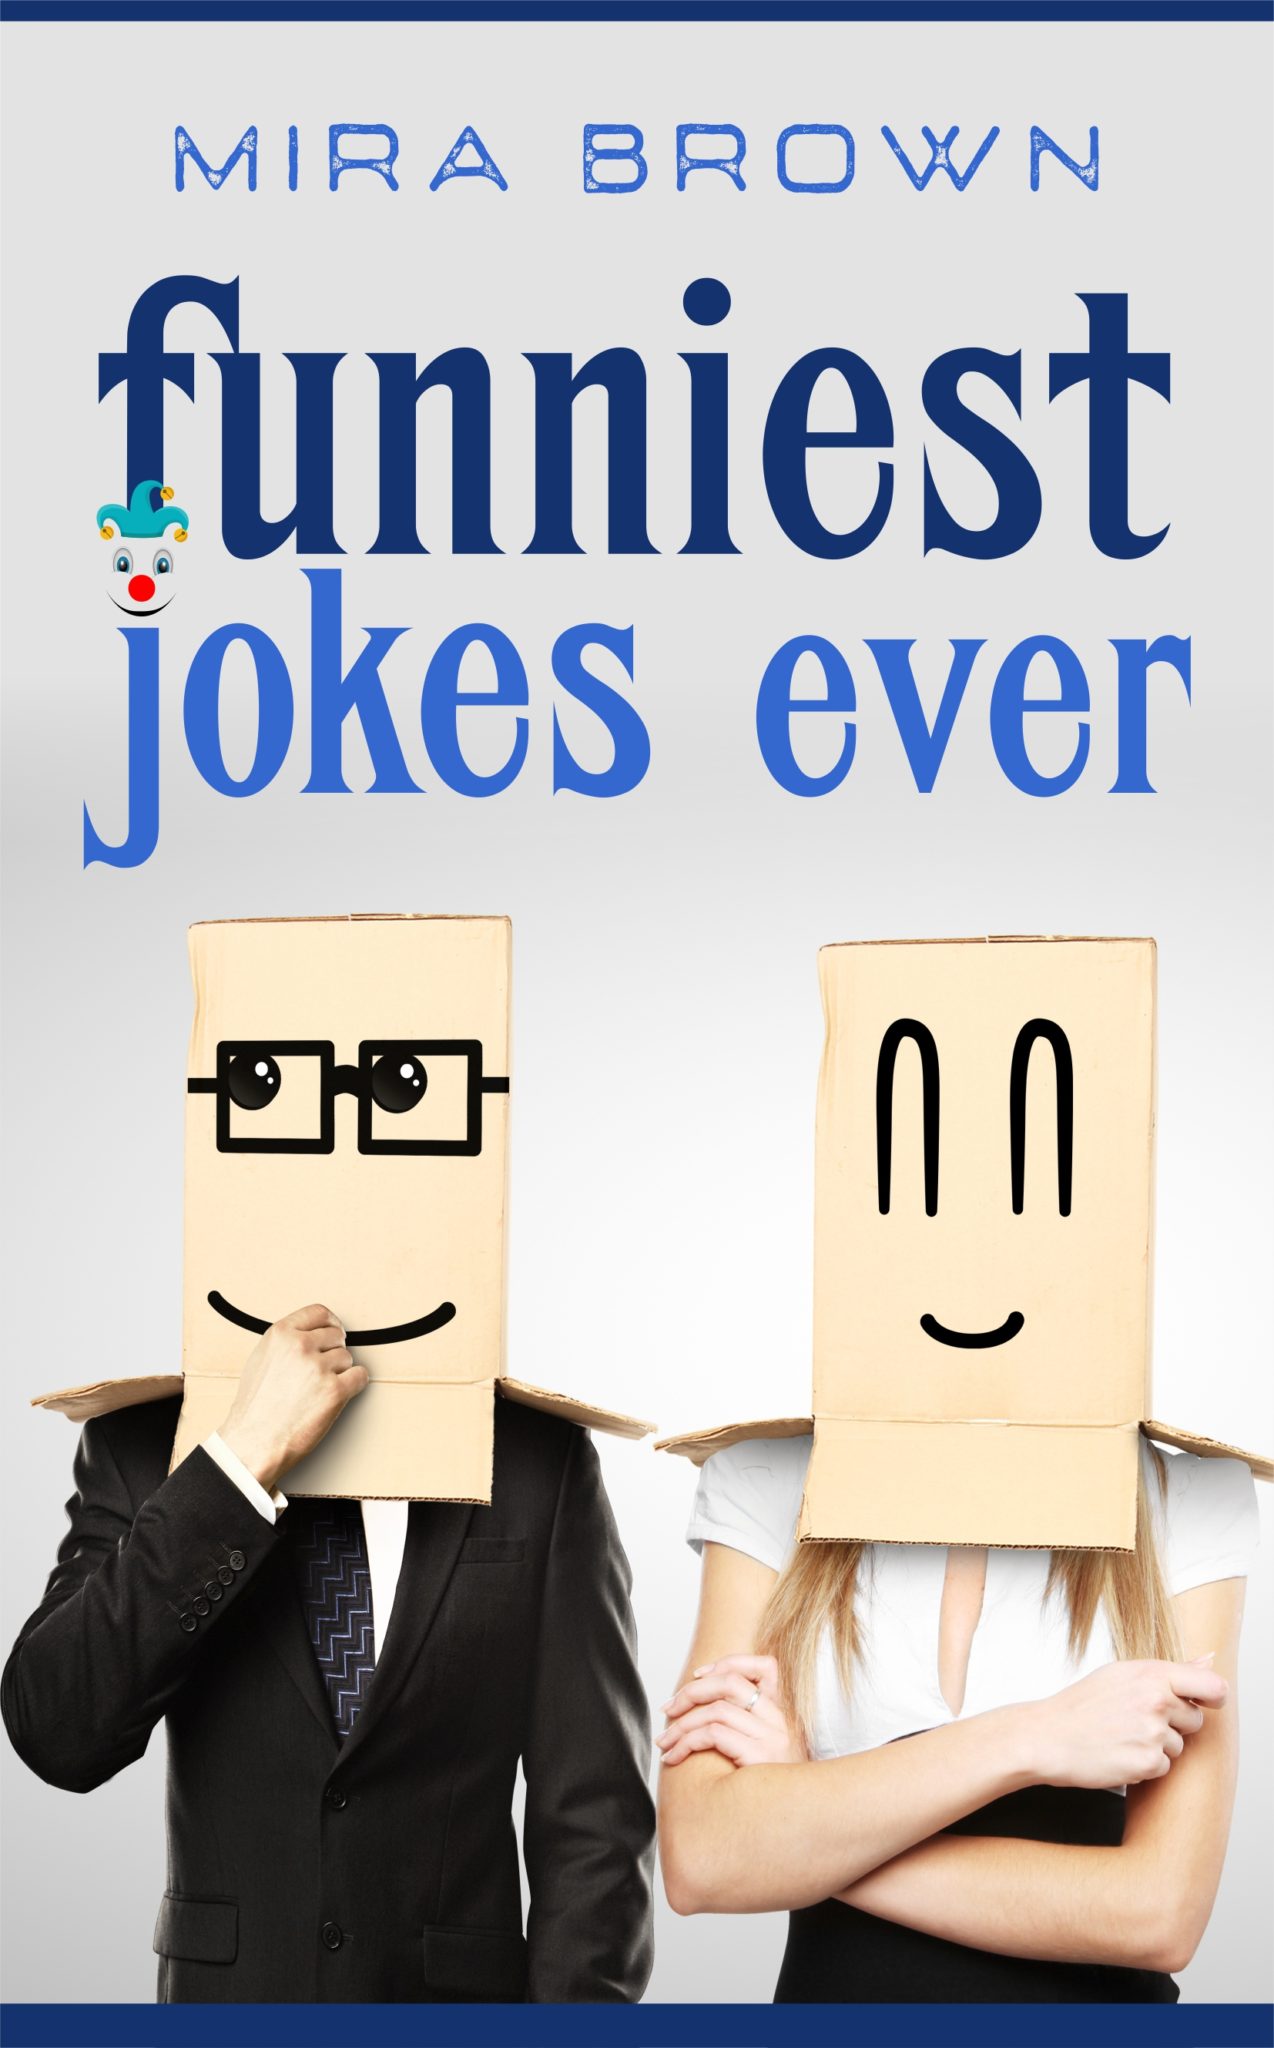 FREE: Funniest Jokes Ever by Mira Brown